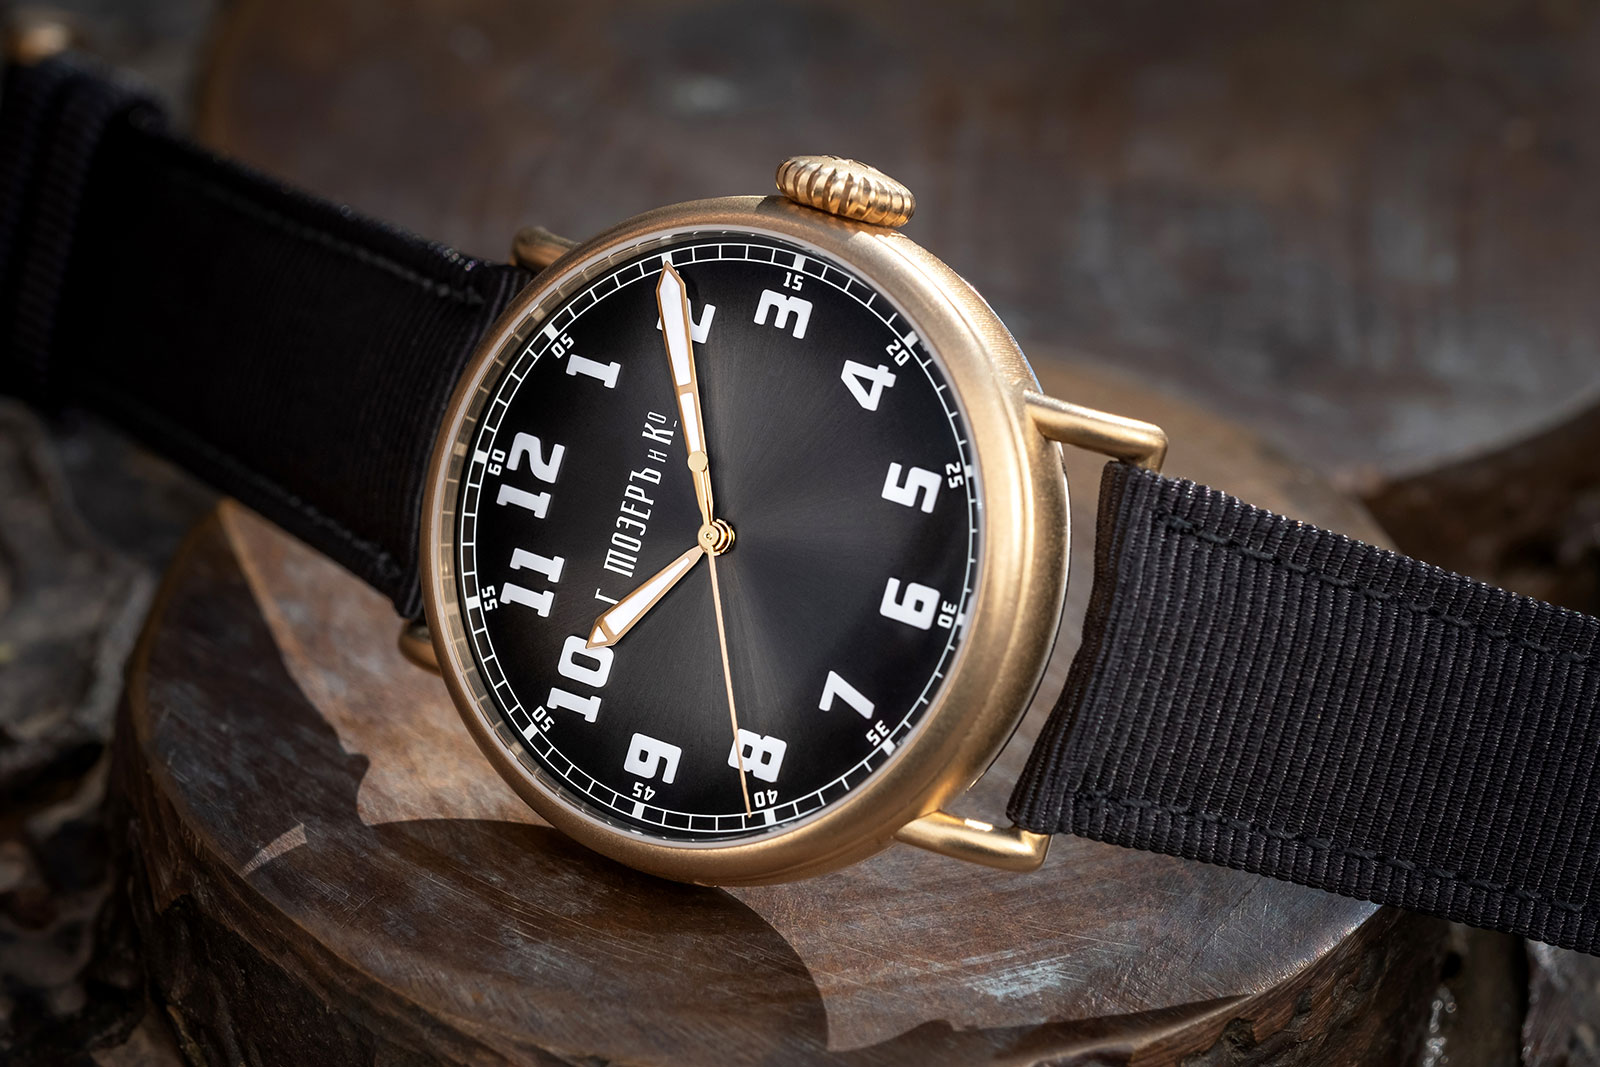 H. Moser & Cie. Introduces the Heritage Bronze “Since 1828”